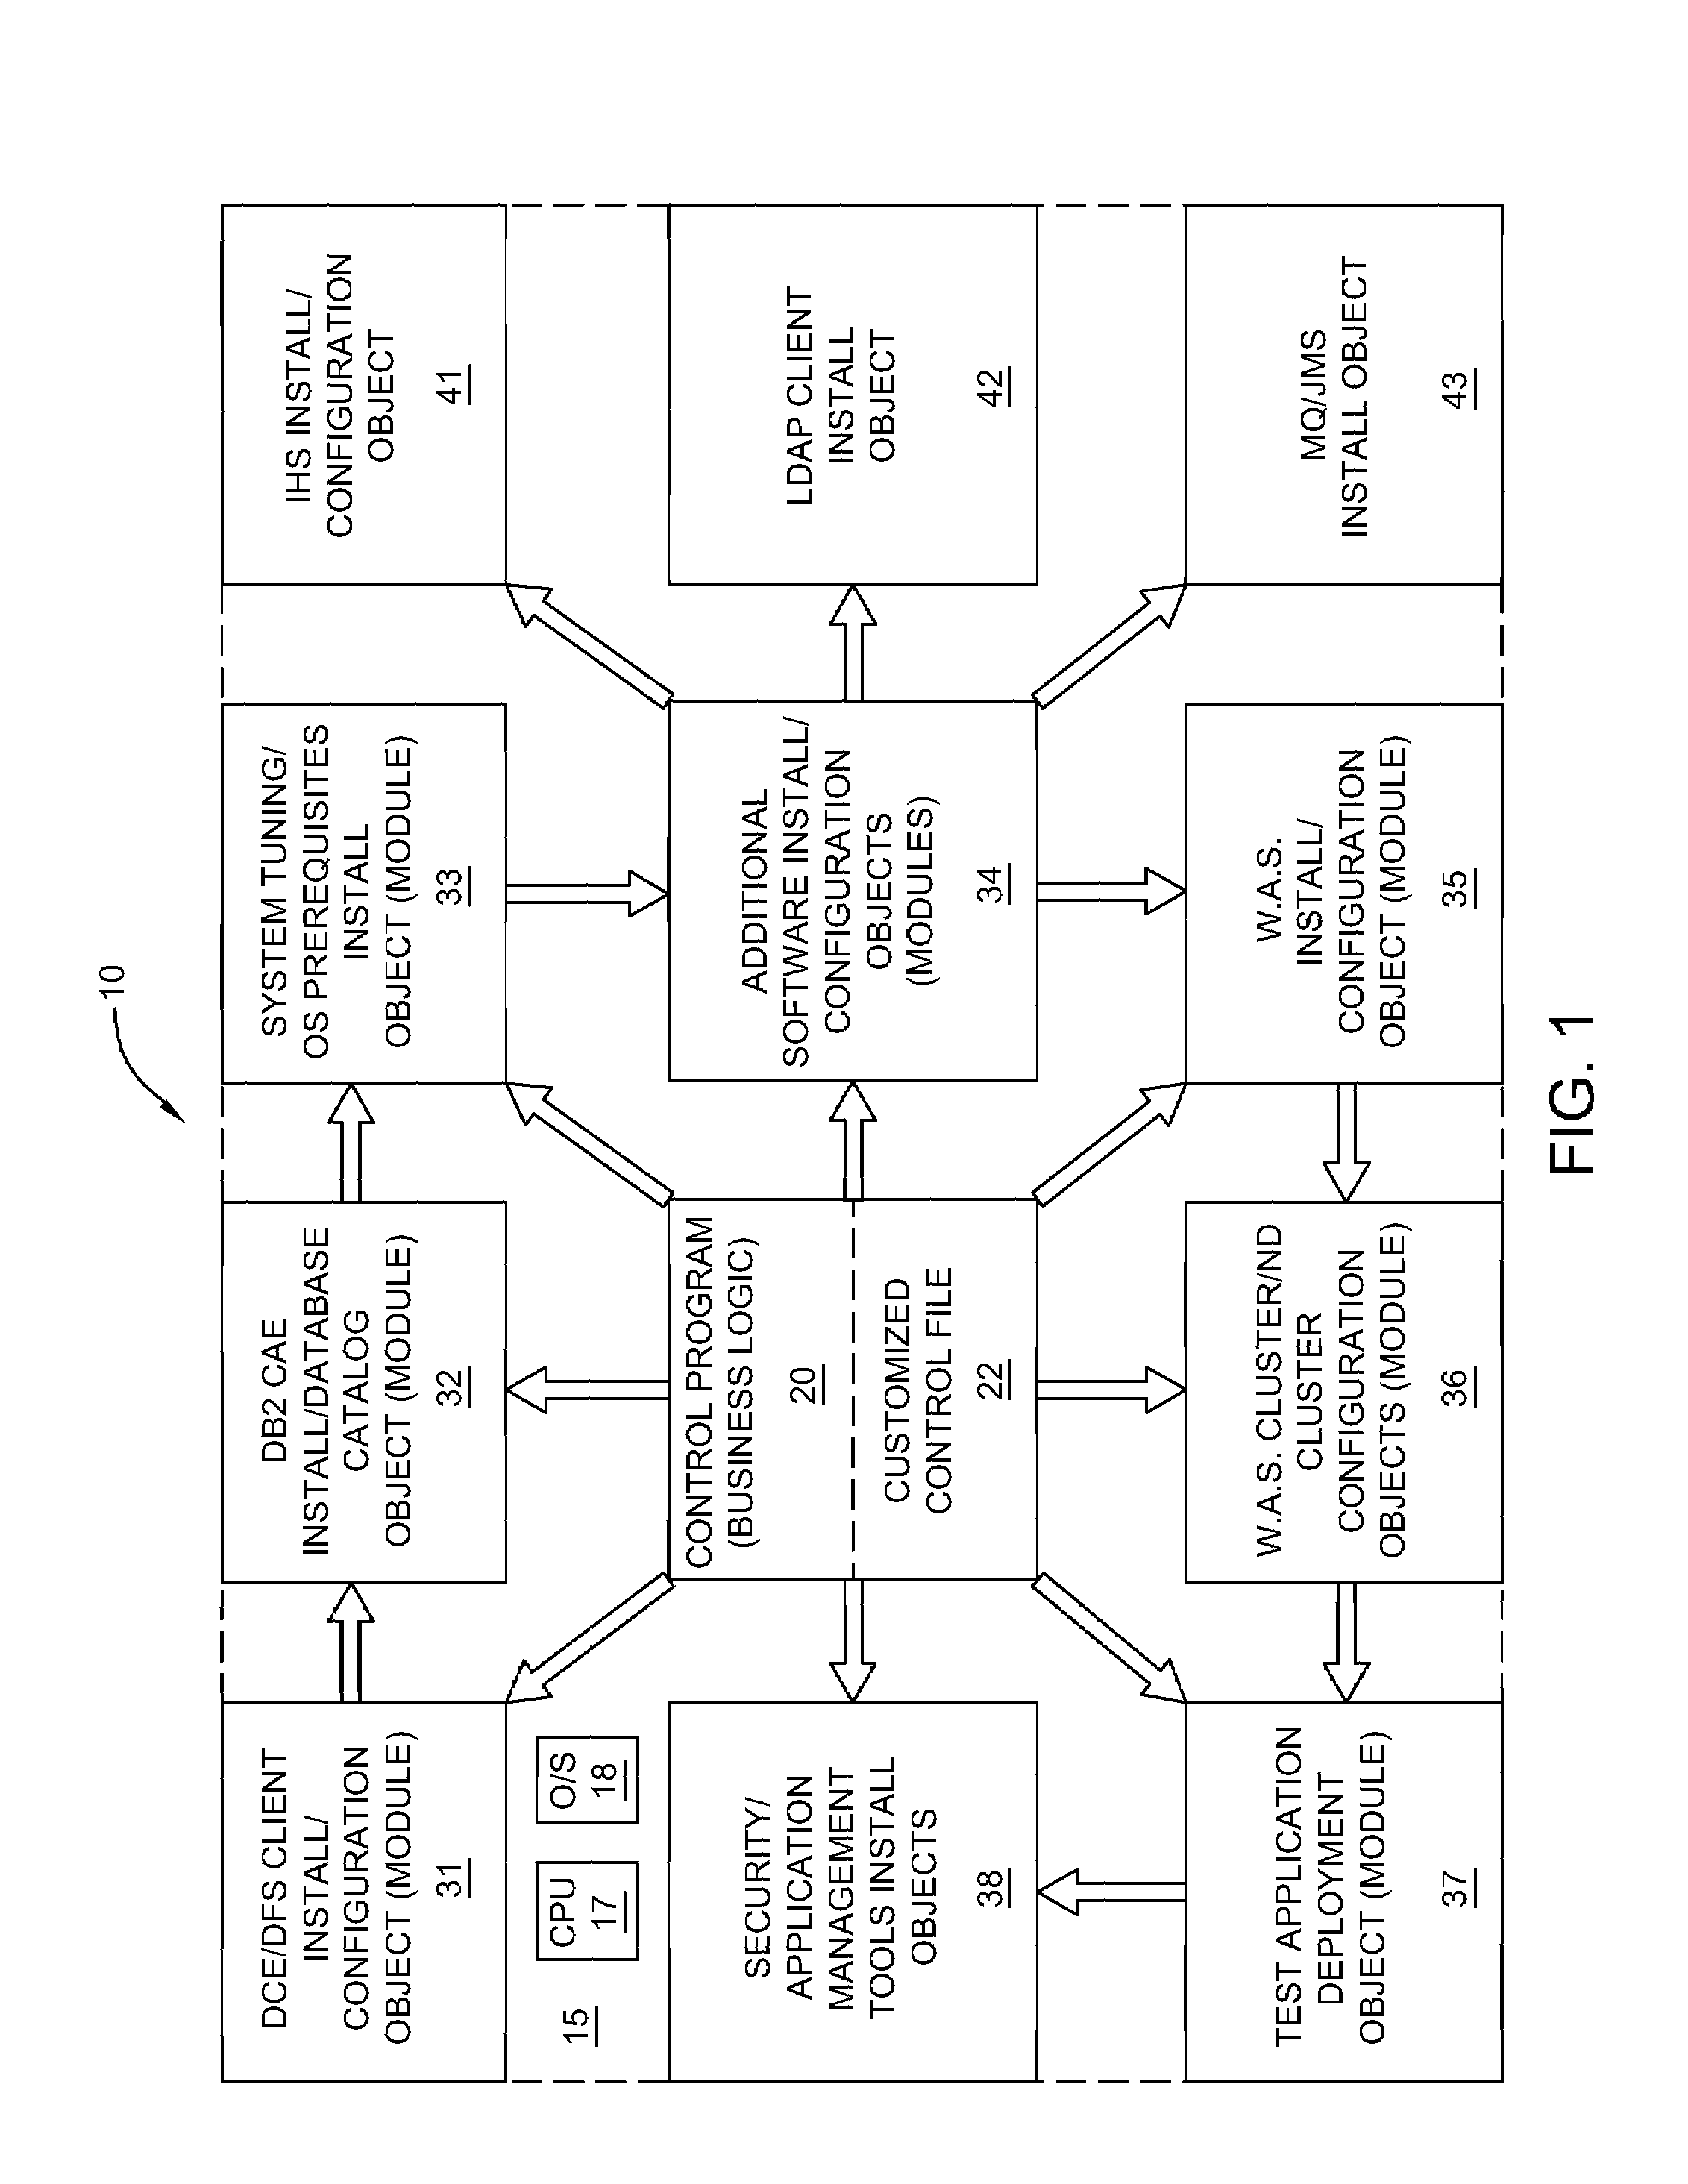 Automatic configuration of a server